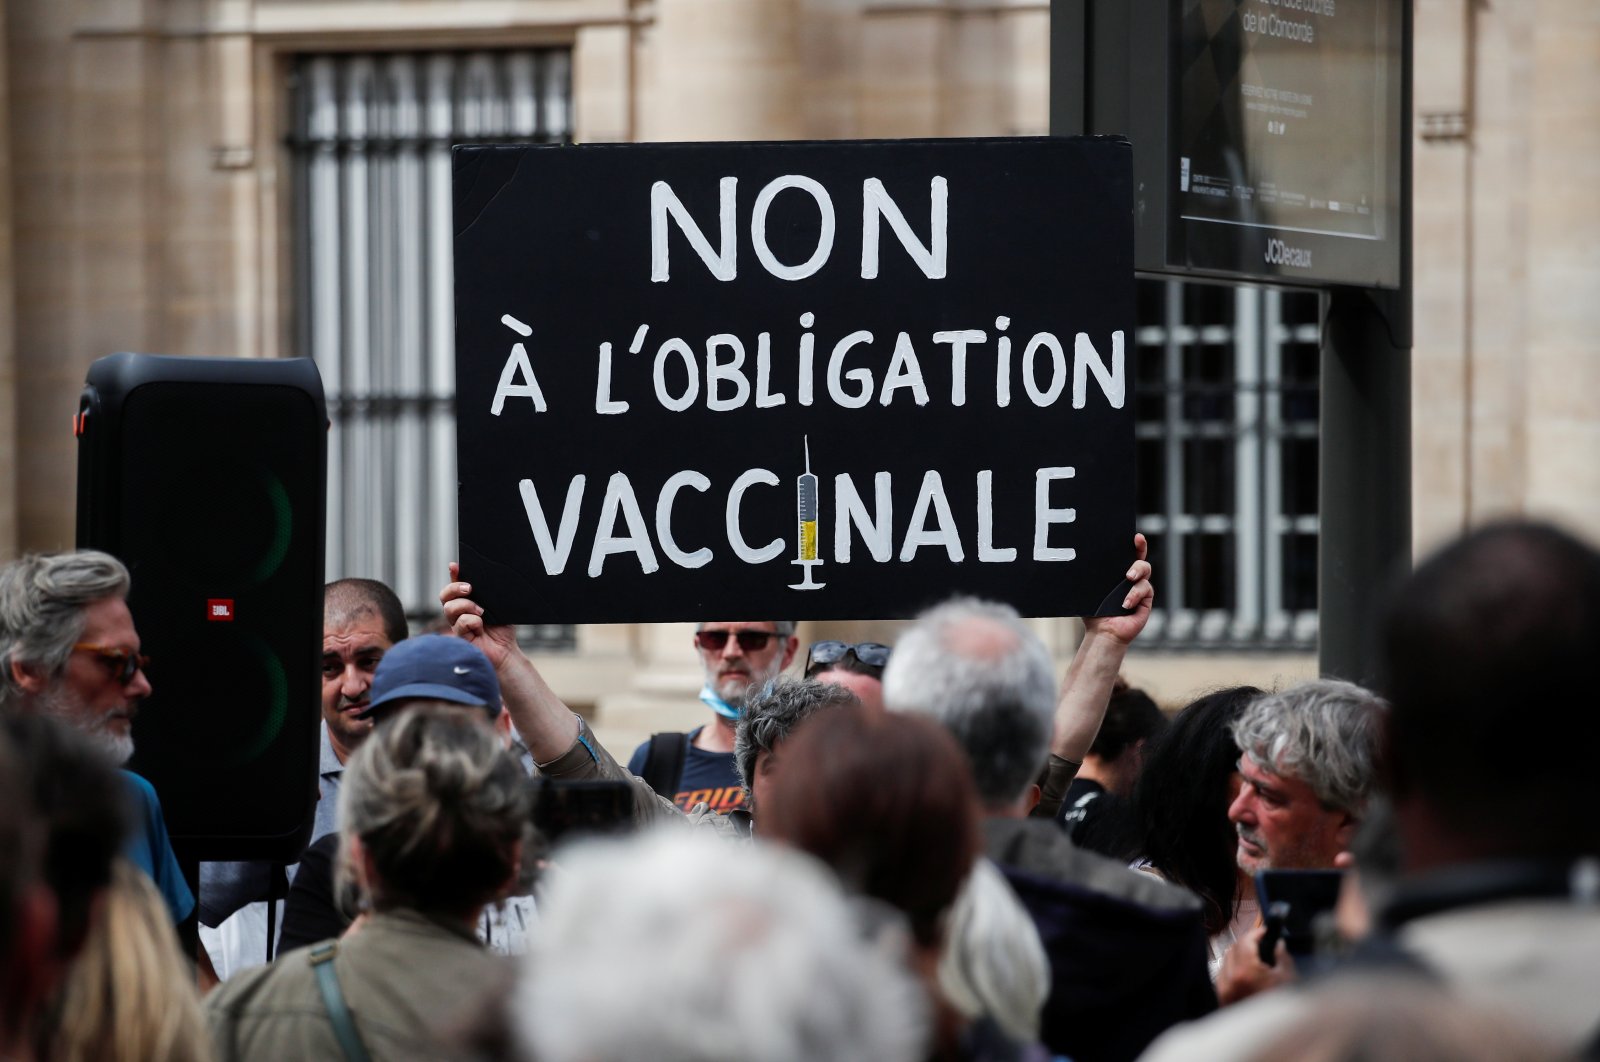 A protester holds a placard during a demonstration called by the "yellow vests" (gilets jaunes) movement against France's restrictions, including a compulsory health pass, to fight the coronavirus outbreak in Paris, France, Aug. 5, 2021. (Reuters)